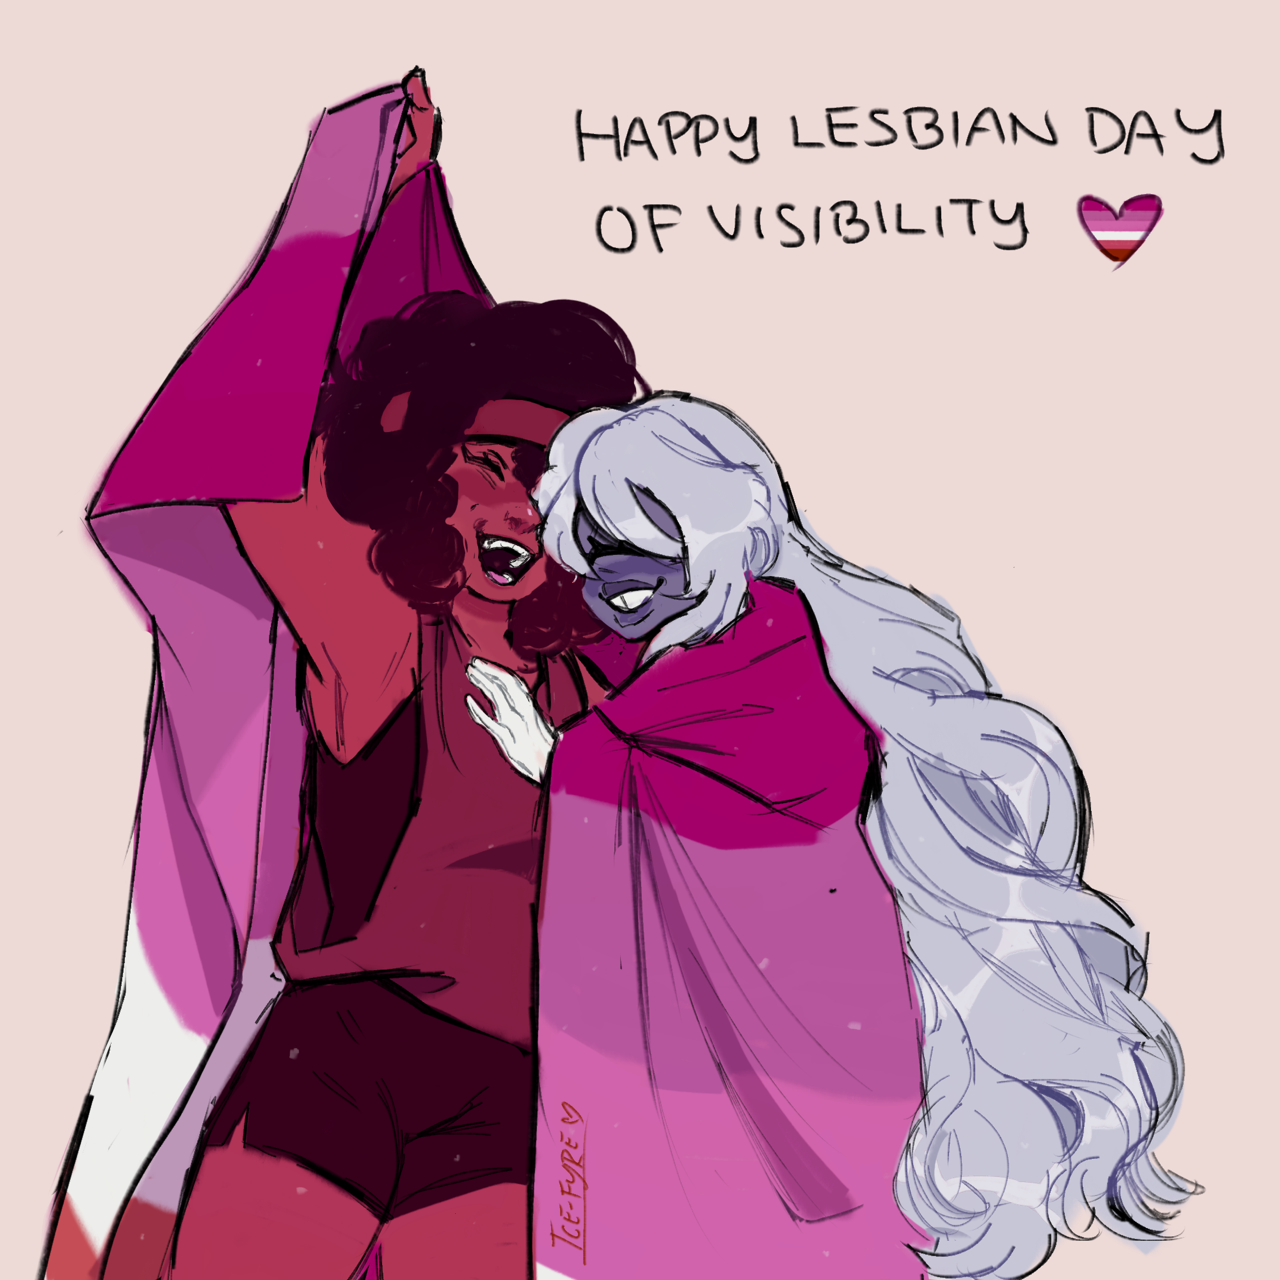 happy lesbian day of visibilty to all of you amazing lesbians out there <3